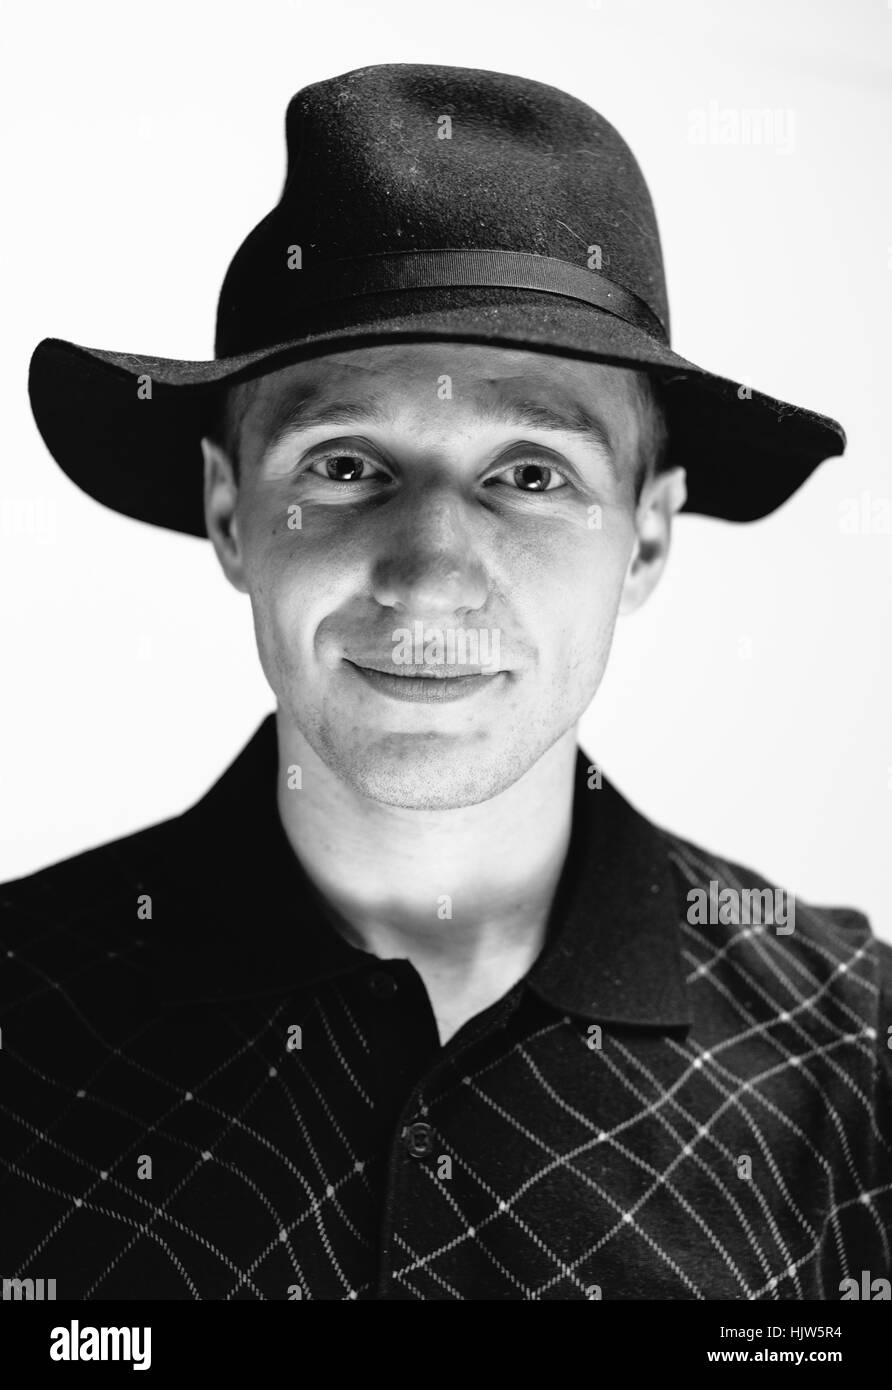 man in an old hat Stock Photo